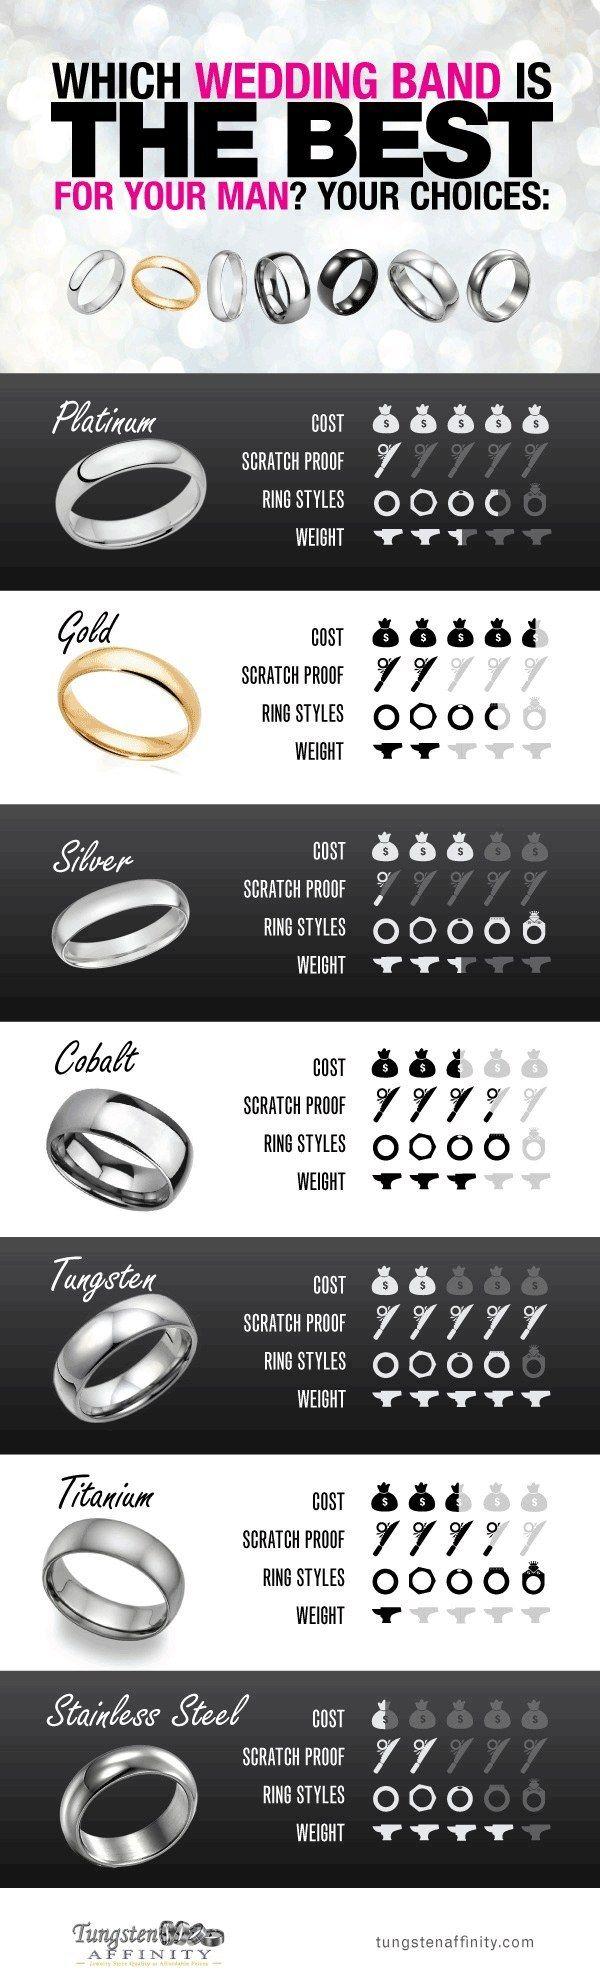 Hochzeit - 19 Engagement Ring Diagrams That Will Make Your Life Easier